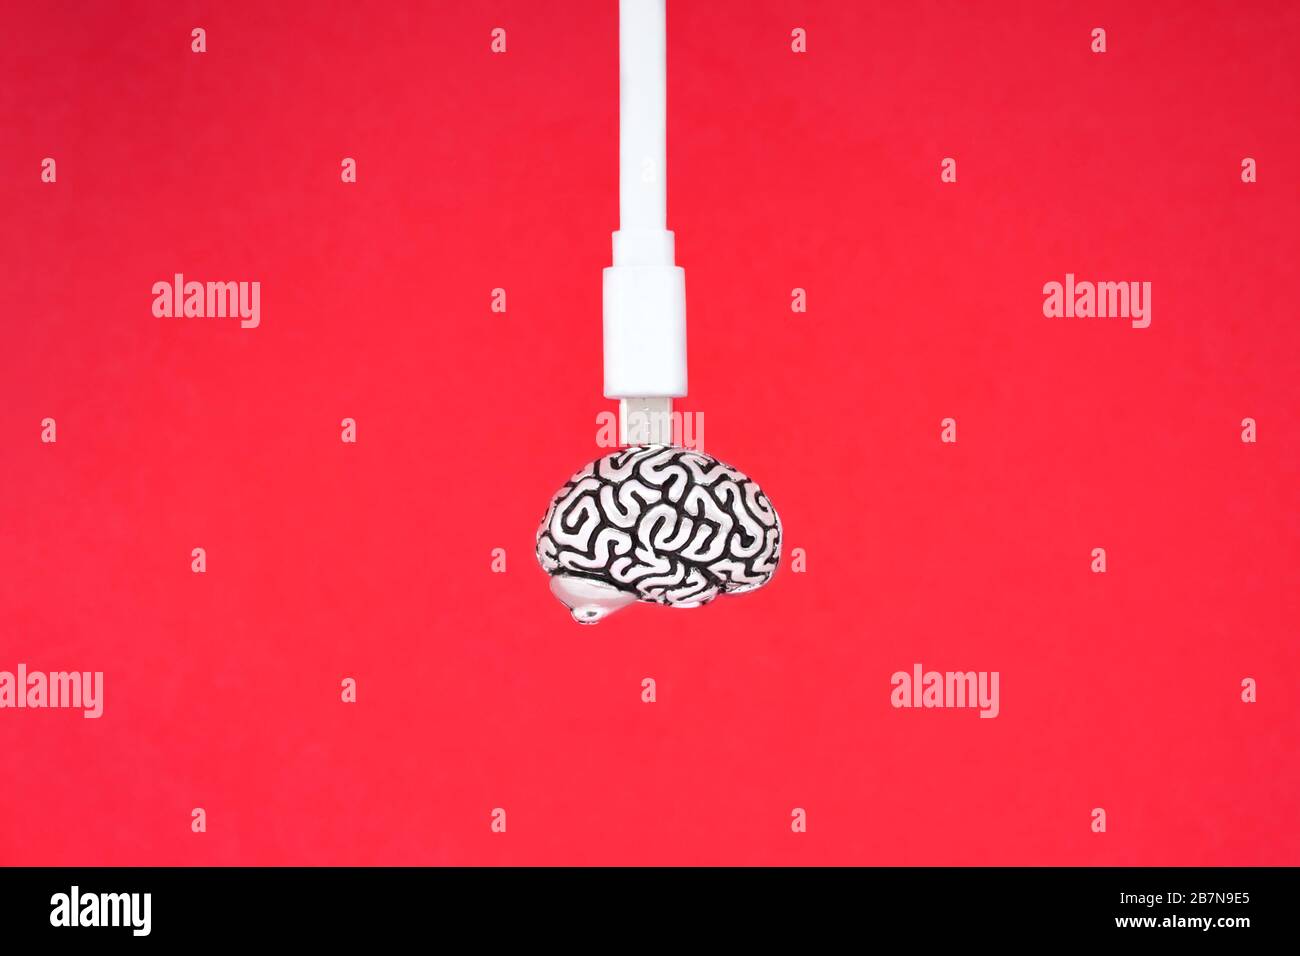 A white micro usb cable connected to a small metal model of a human brain isolated on a red background. Profile shot. Stock Photo